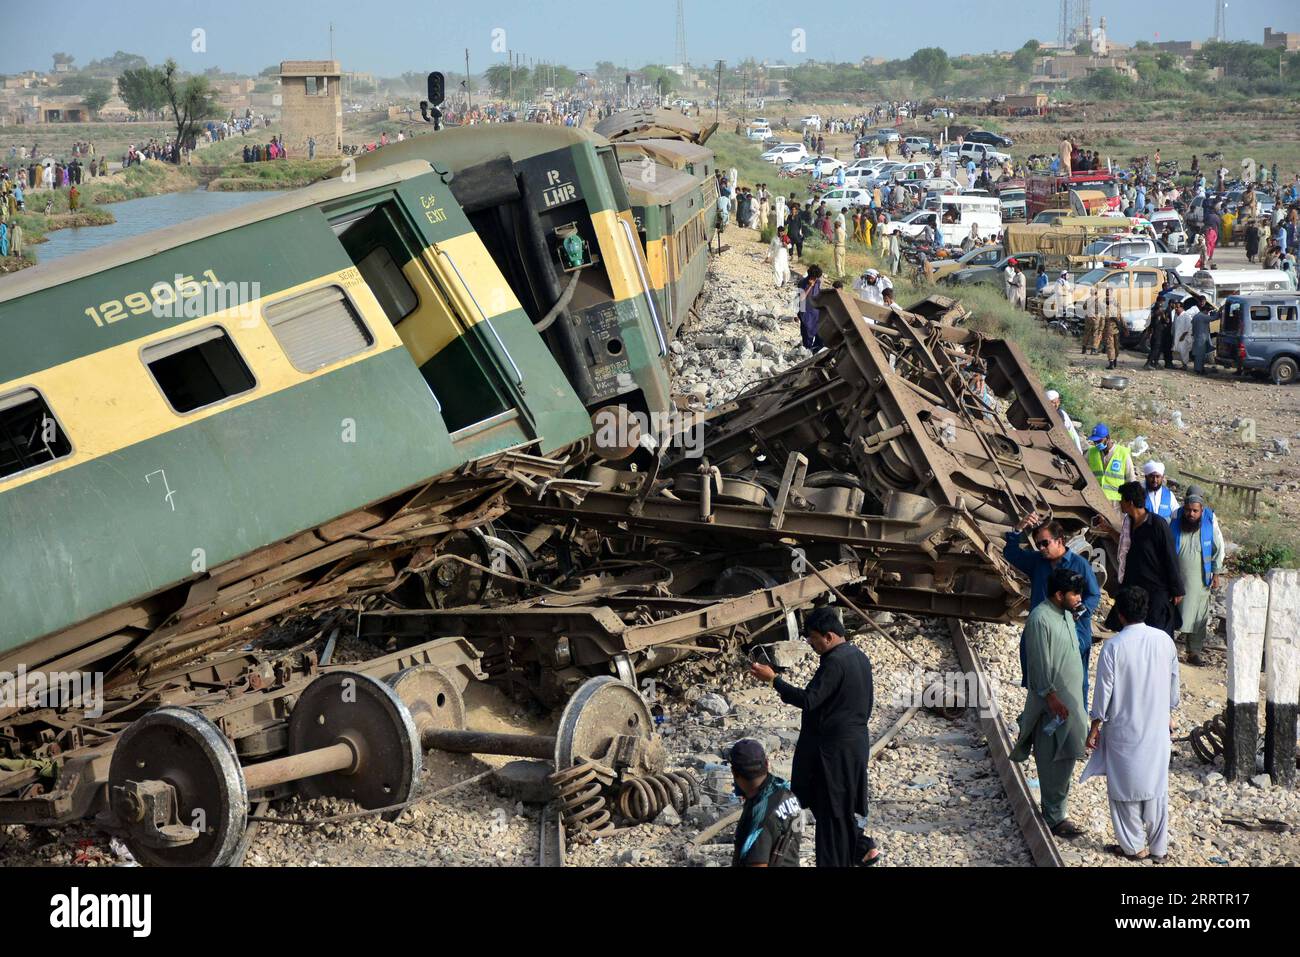 230807 -- SANGHAR, Aug. 7, 2023 -- People gather near derailed coaches of a passenger train in Sanghar district of Pakistan s southern Sindh province, on Aug. 6, 2023. At least 22 people were killed and over 50 others injured on Sunday after a passenger train derailed in the Sanghar district of Pakistan s southern Sindh province, local police said. The accident took place when 10 coaches of the Hazara Express train derailed when it was crossing a canal bridge near Sarhari town in the Shahdadpur area of the district, Muhammad Younis Chandio, deputy inspector general of police of the region, tol Stock Photo